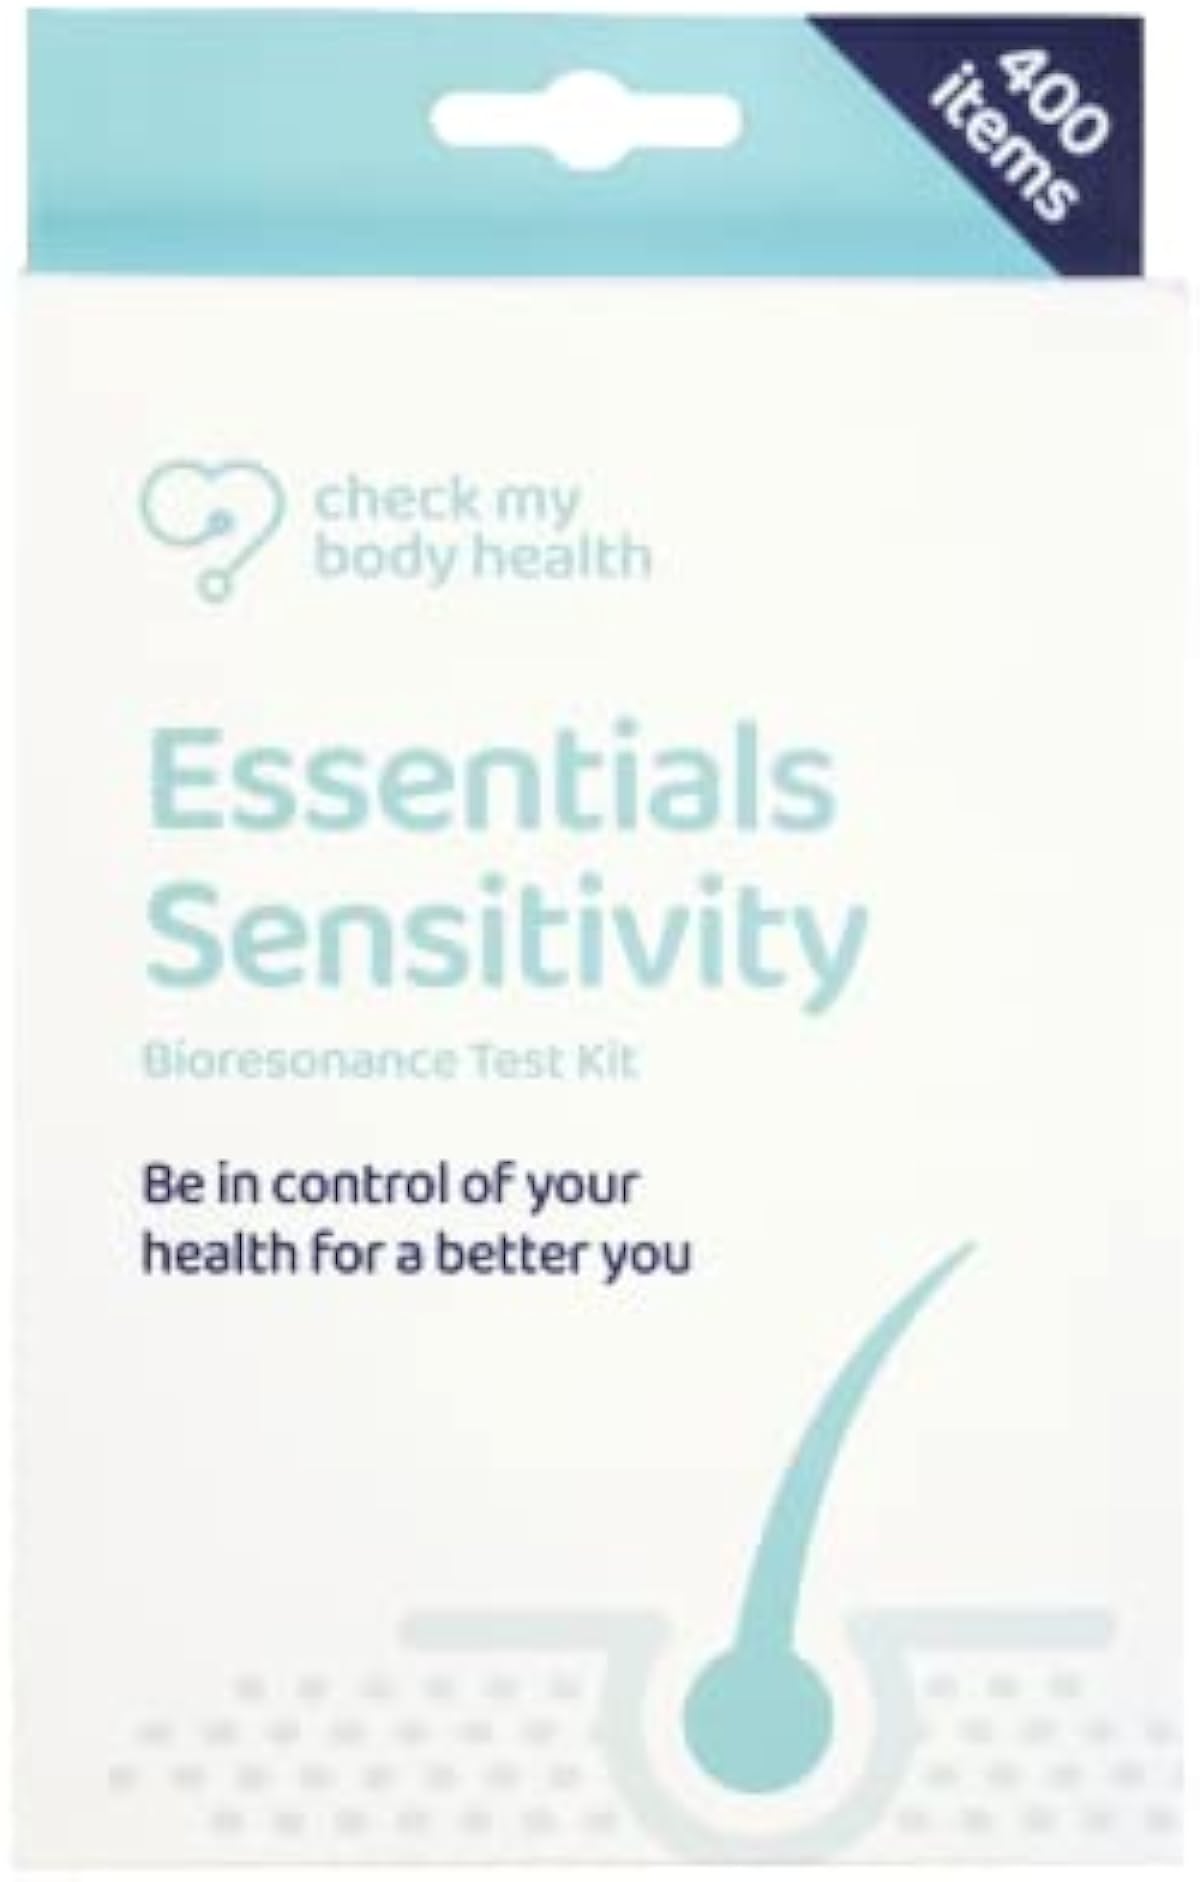 Check My Body Health | Essentials Food Sensitivity Test | Check for 400 Different Intolerances | Easy to Use Home Hair Strand Testing Kit & Intolerance Screening for Adults | Results in 5 Days